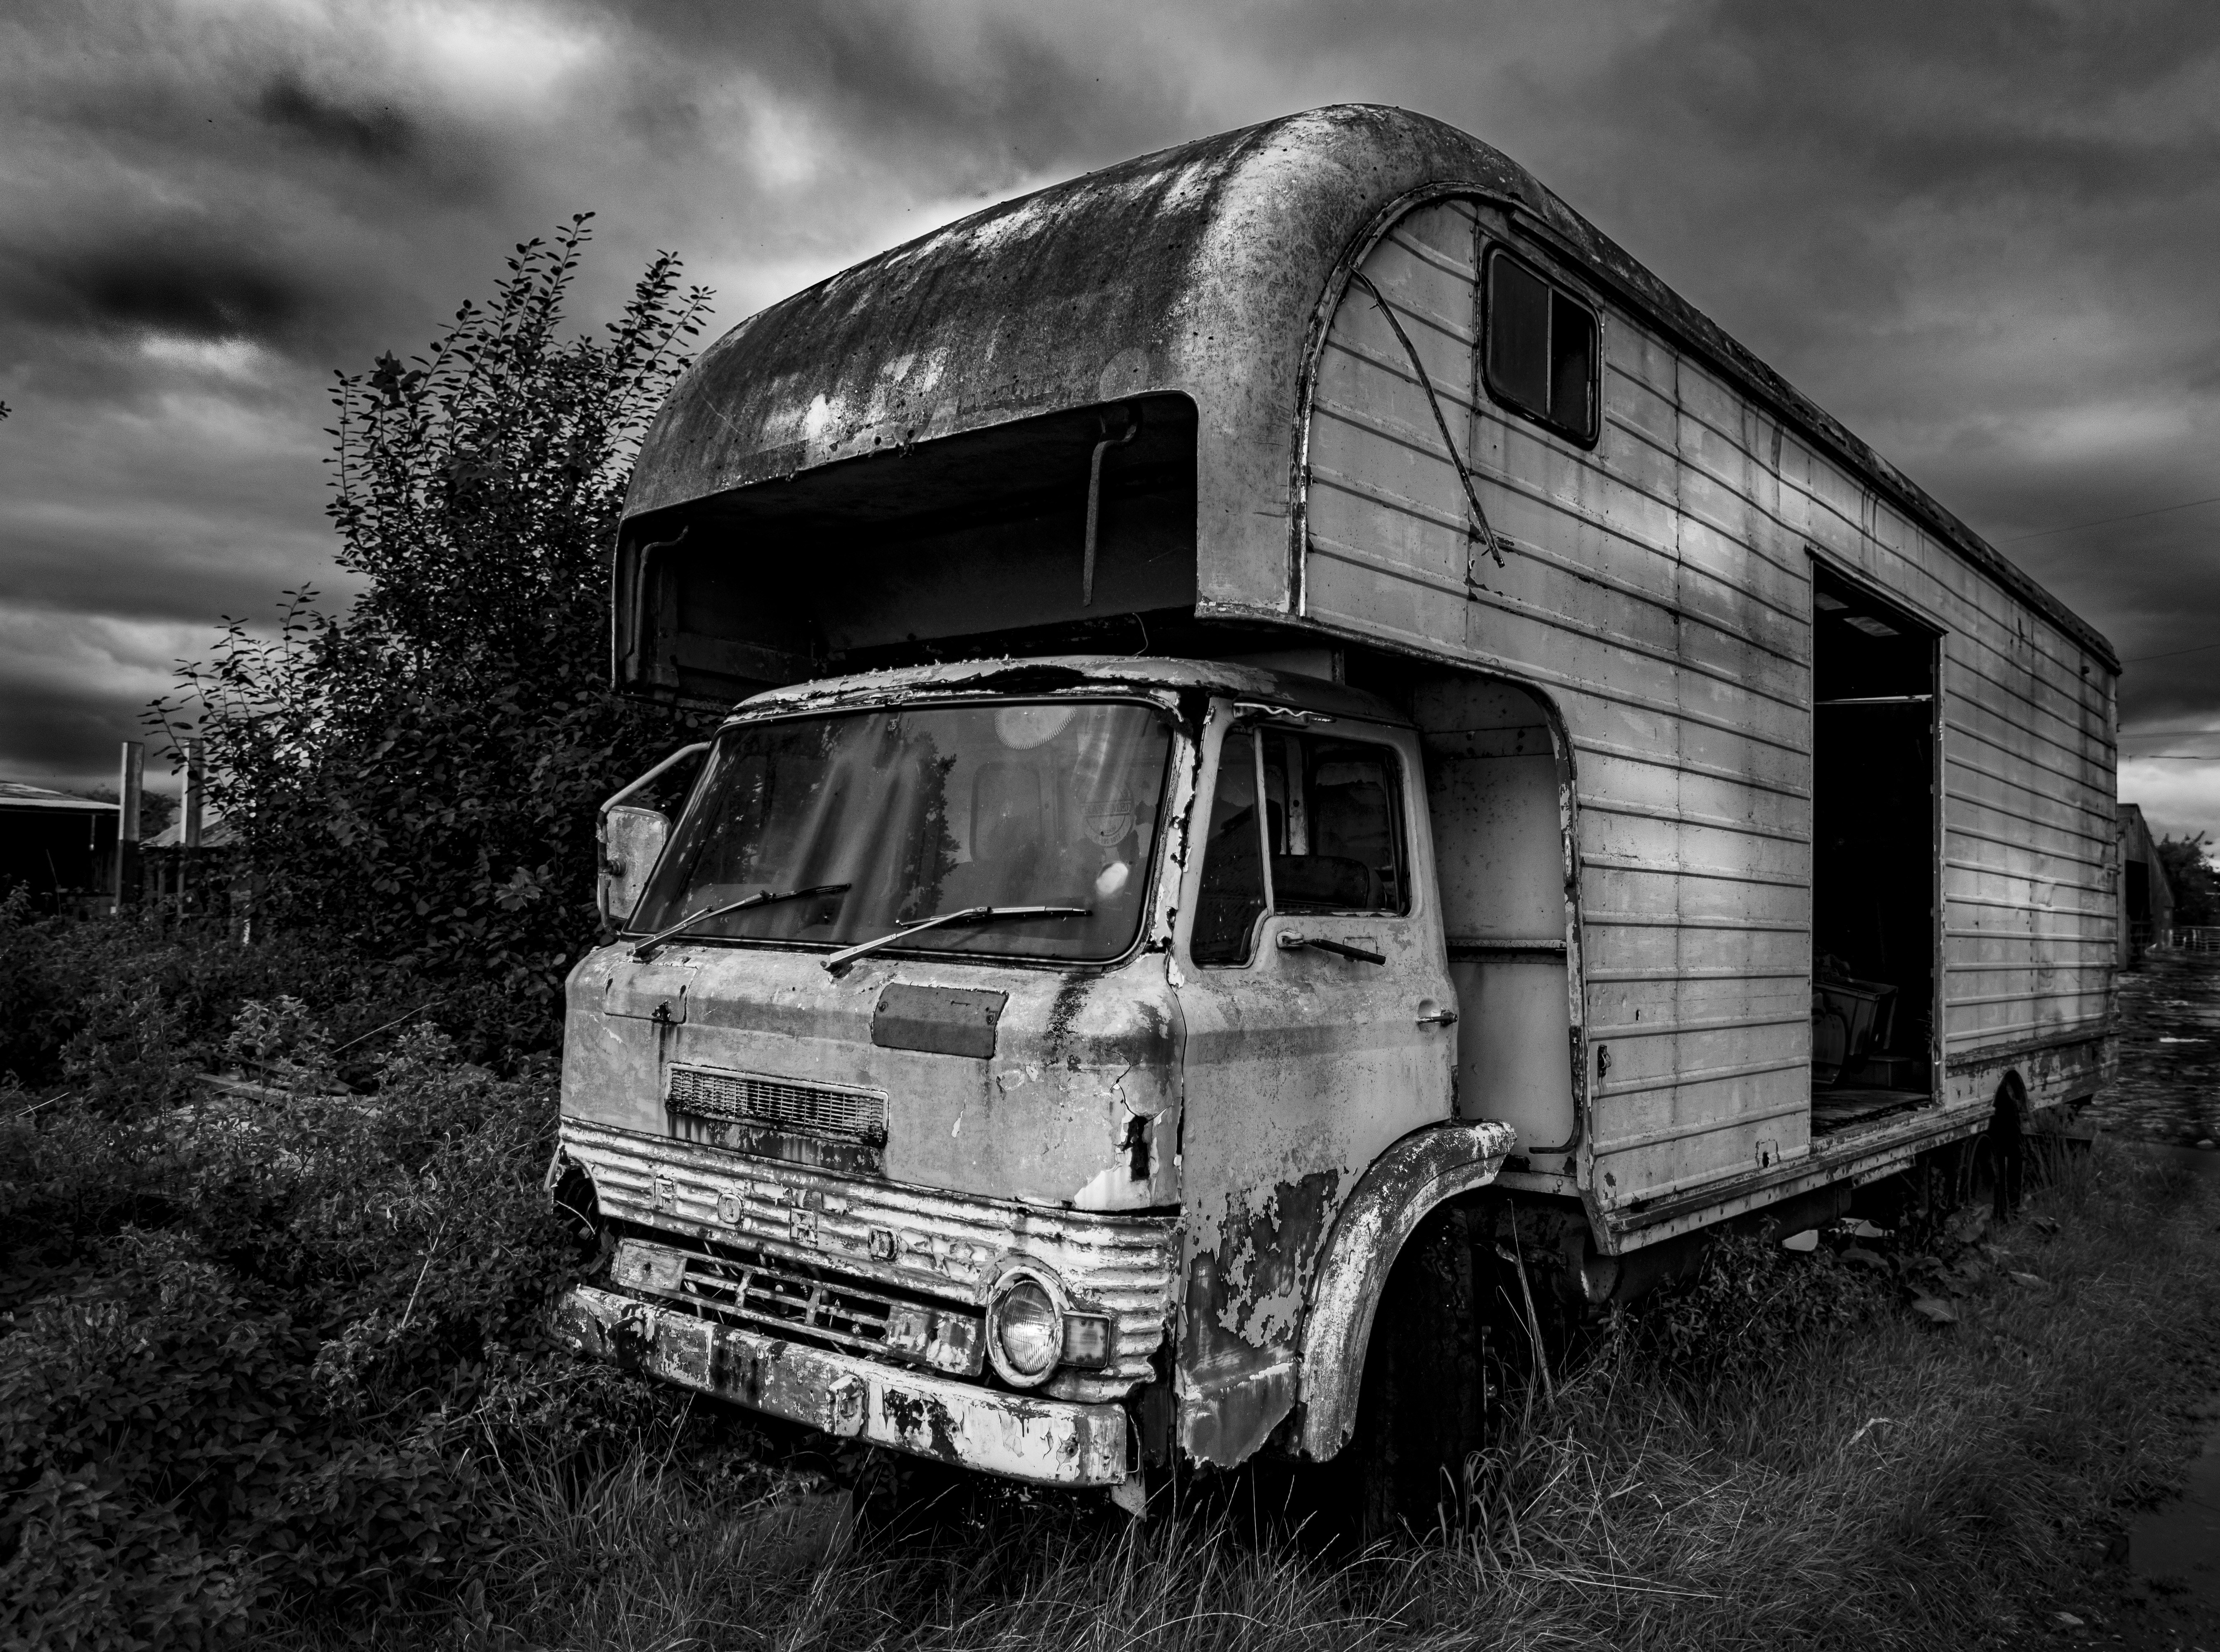 An old truck standing abandoned for 30 years